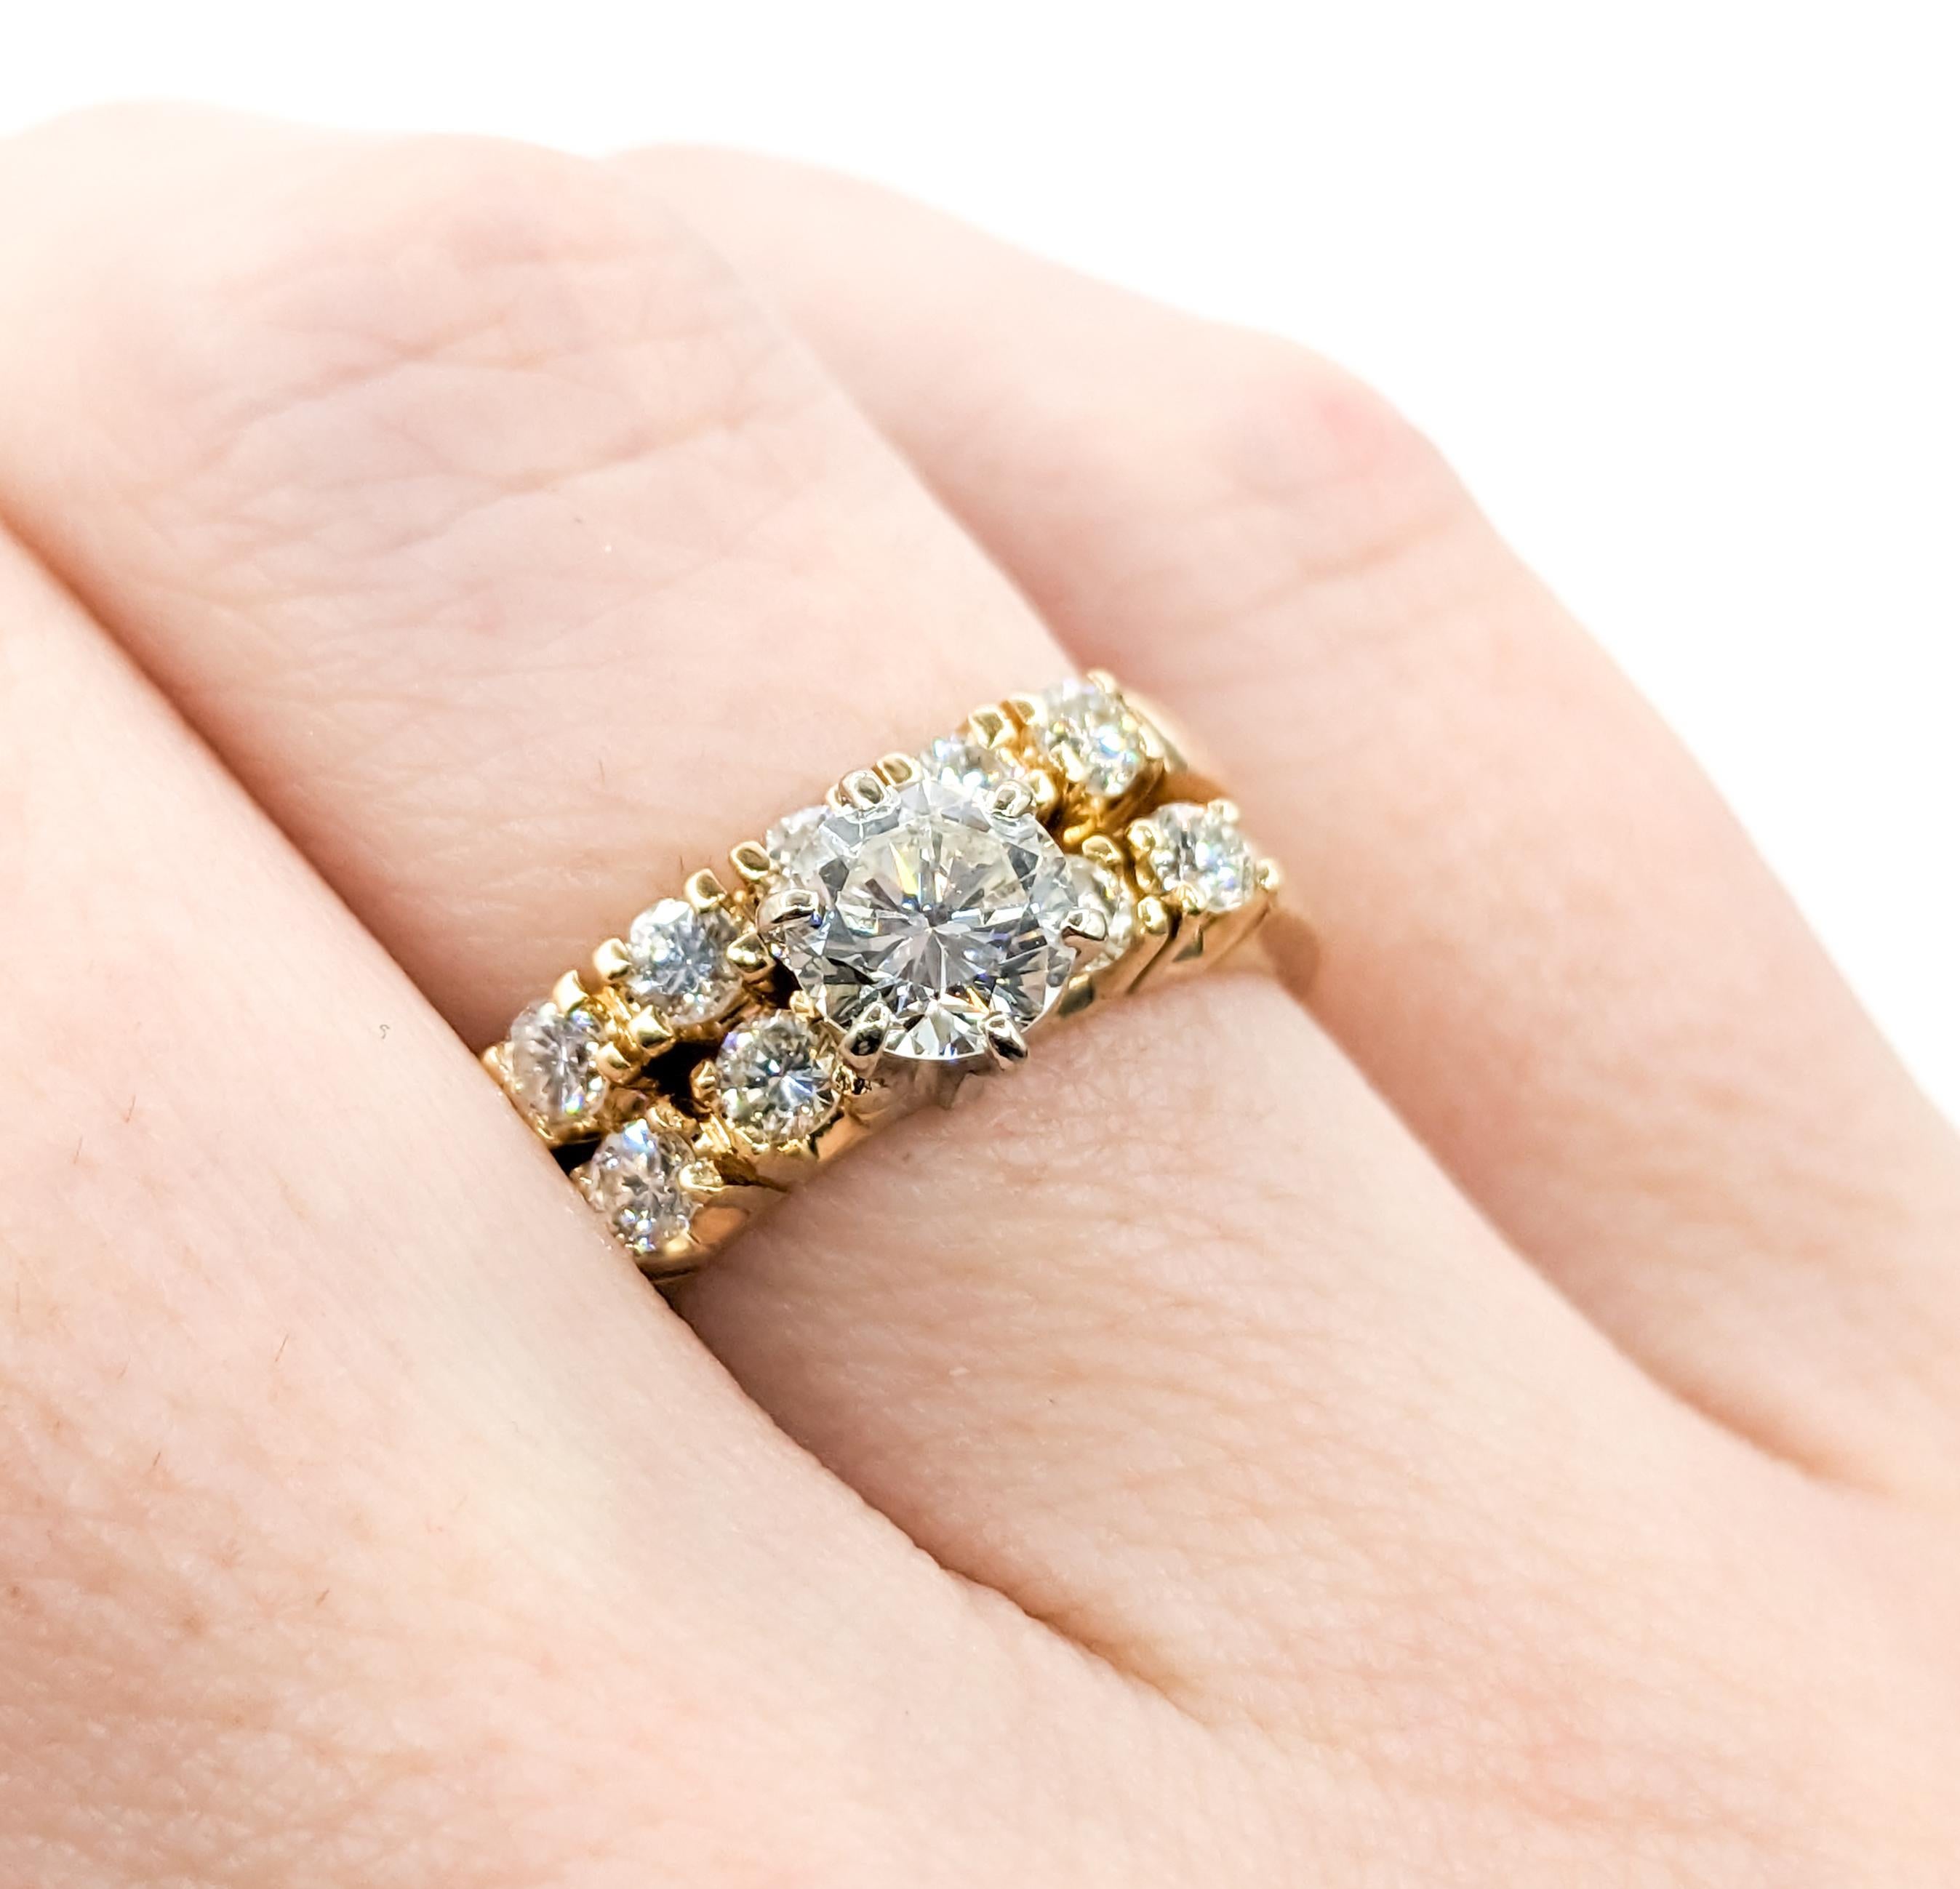 Elegant Diamond Wedding Set in Yellow Gold In Excellent Condition For Sale In Bloomington, MN